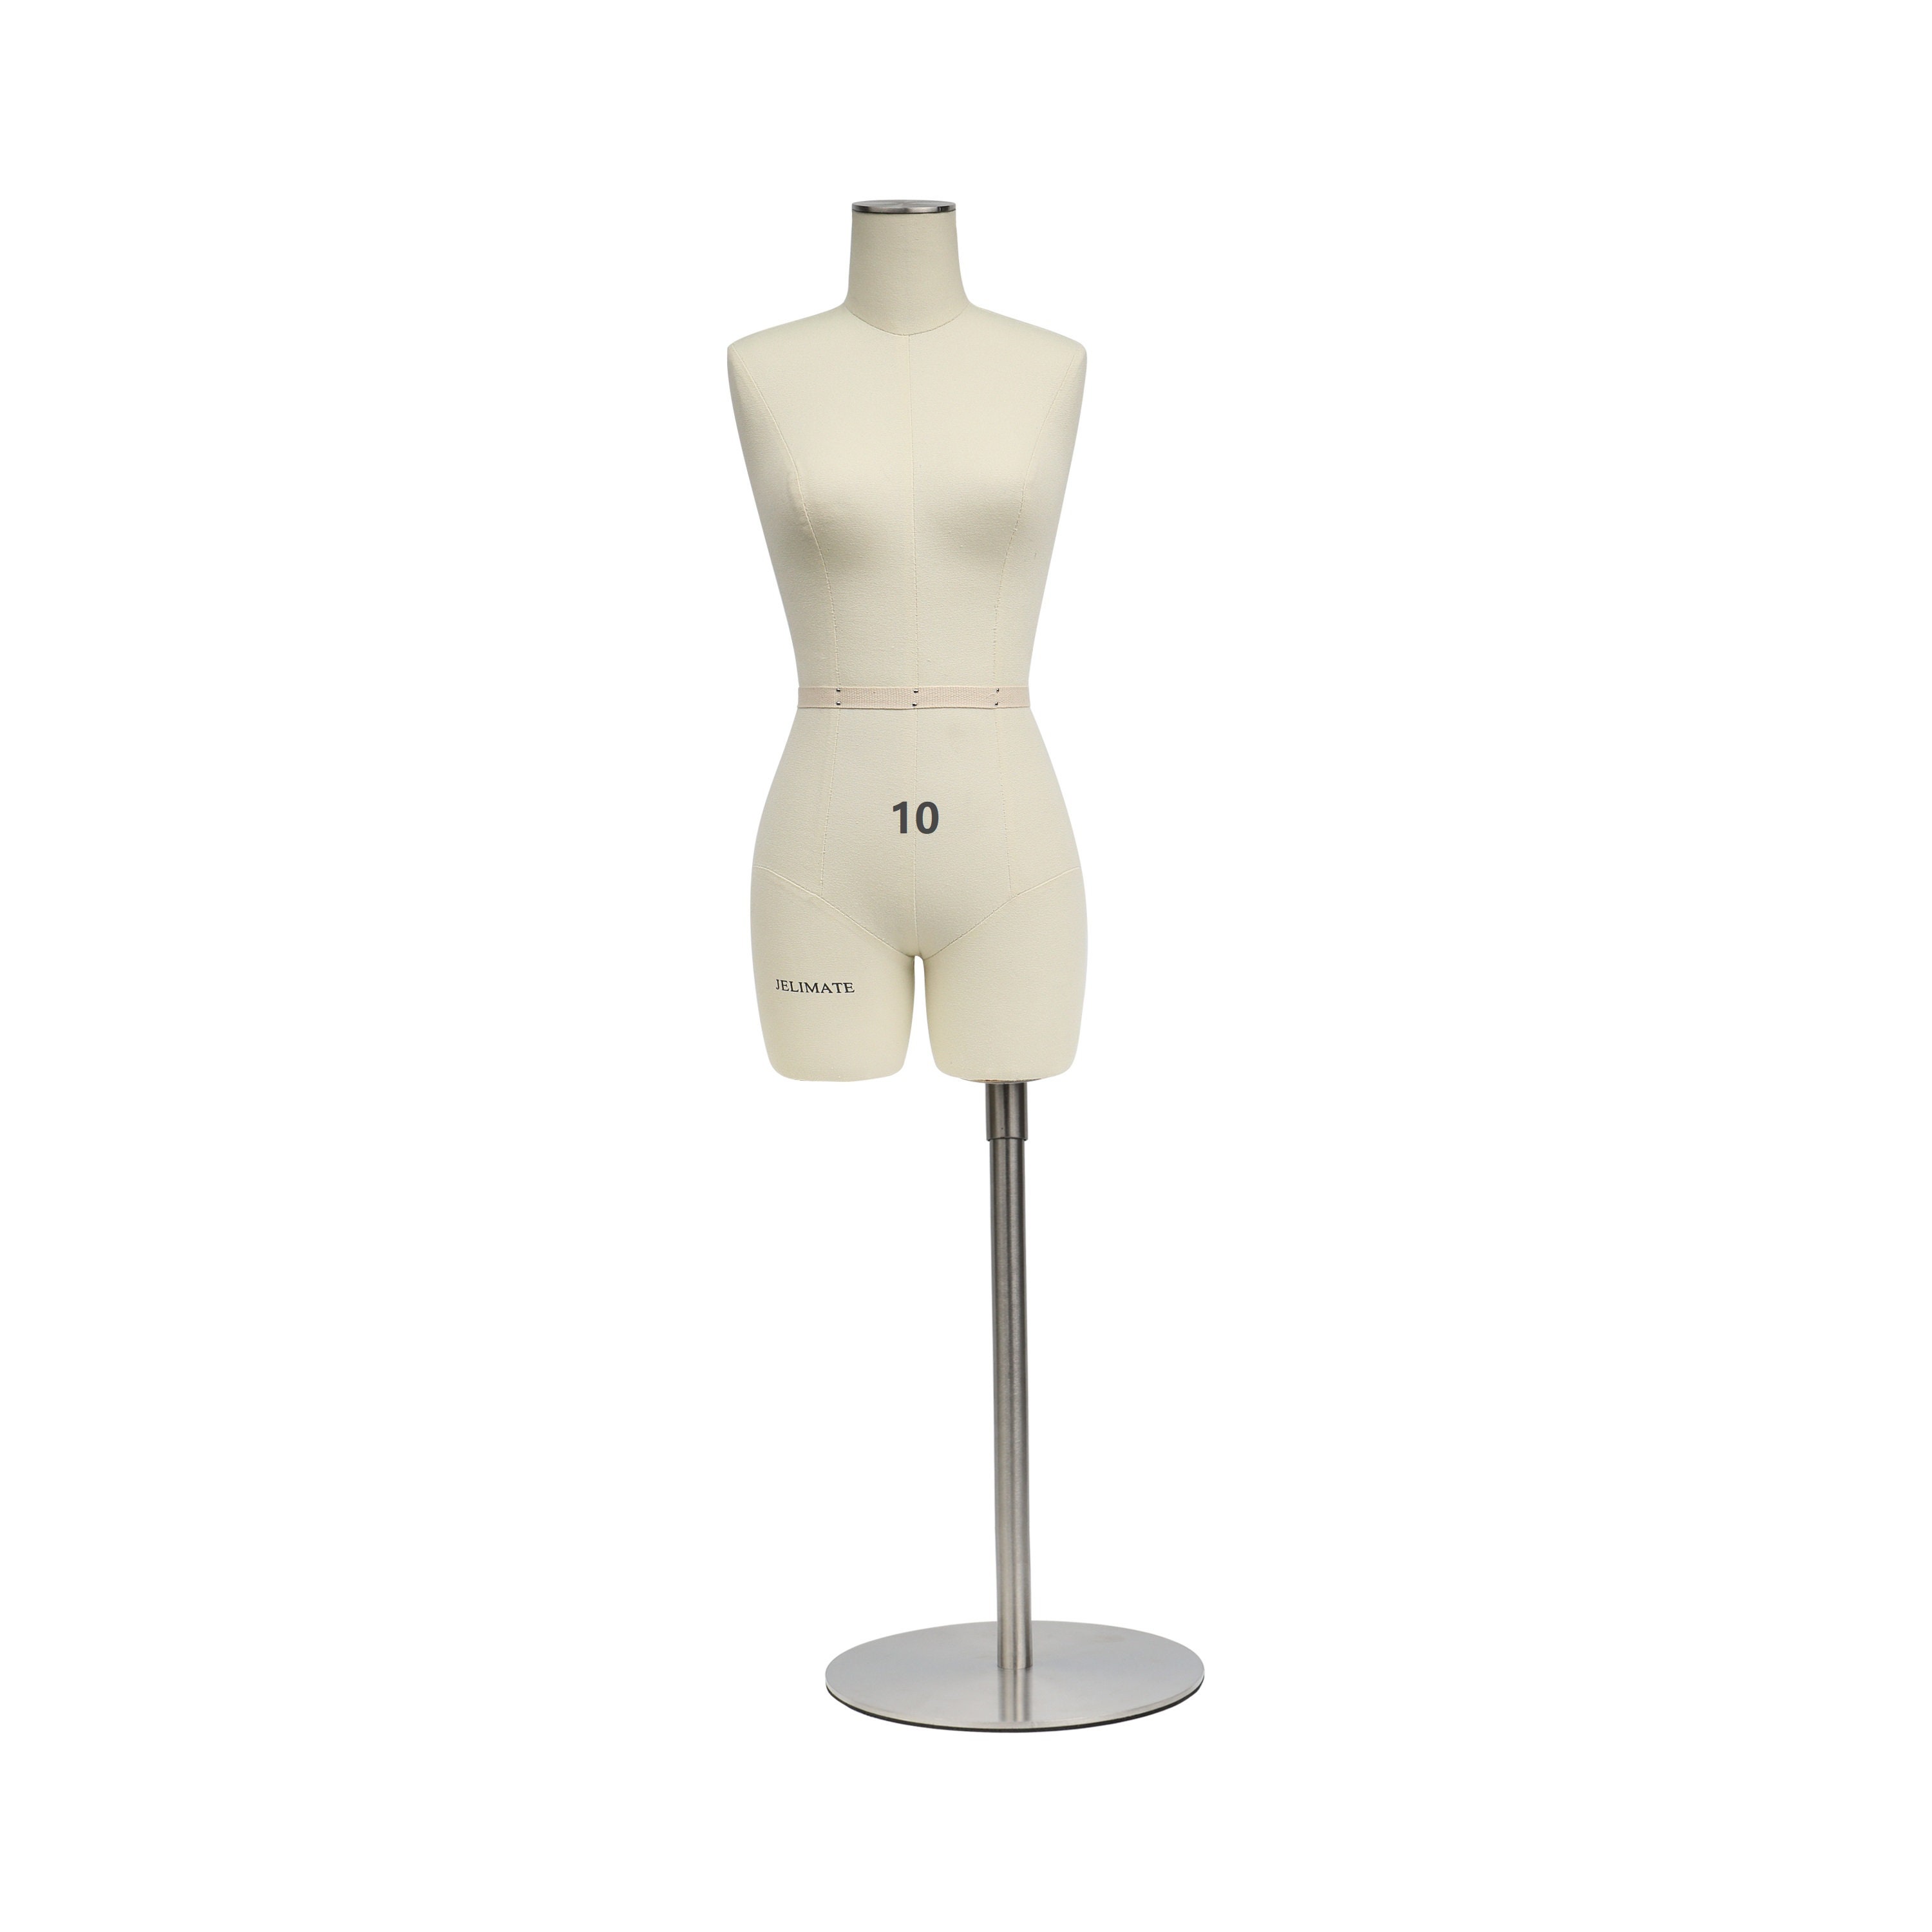 Custom Dress Forms - from a 3D scan - PersonalFashion, Los Angeles